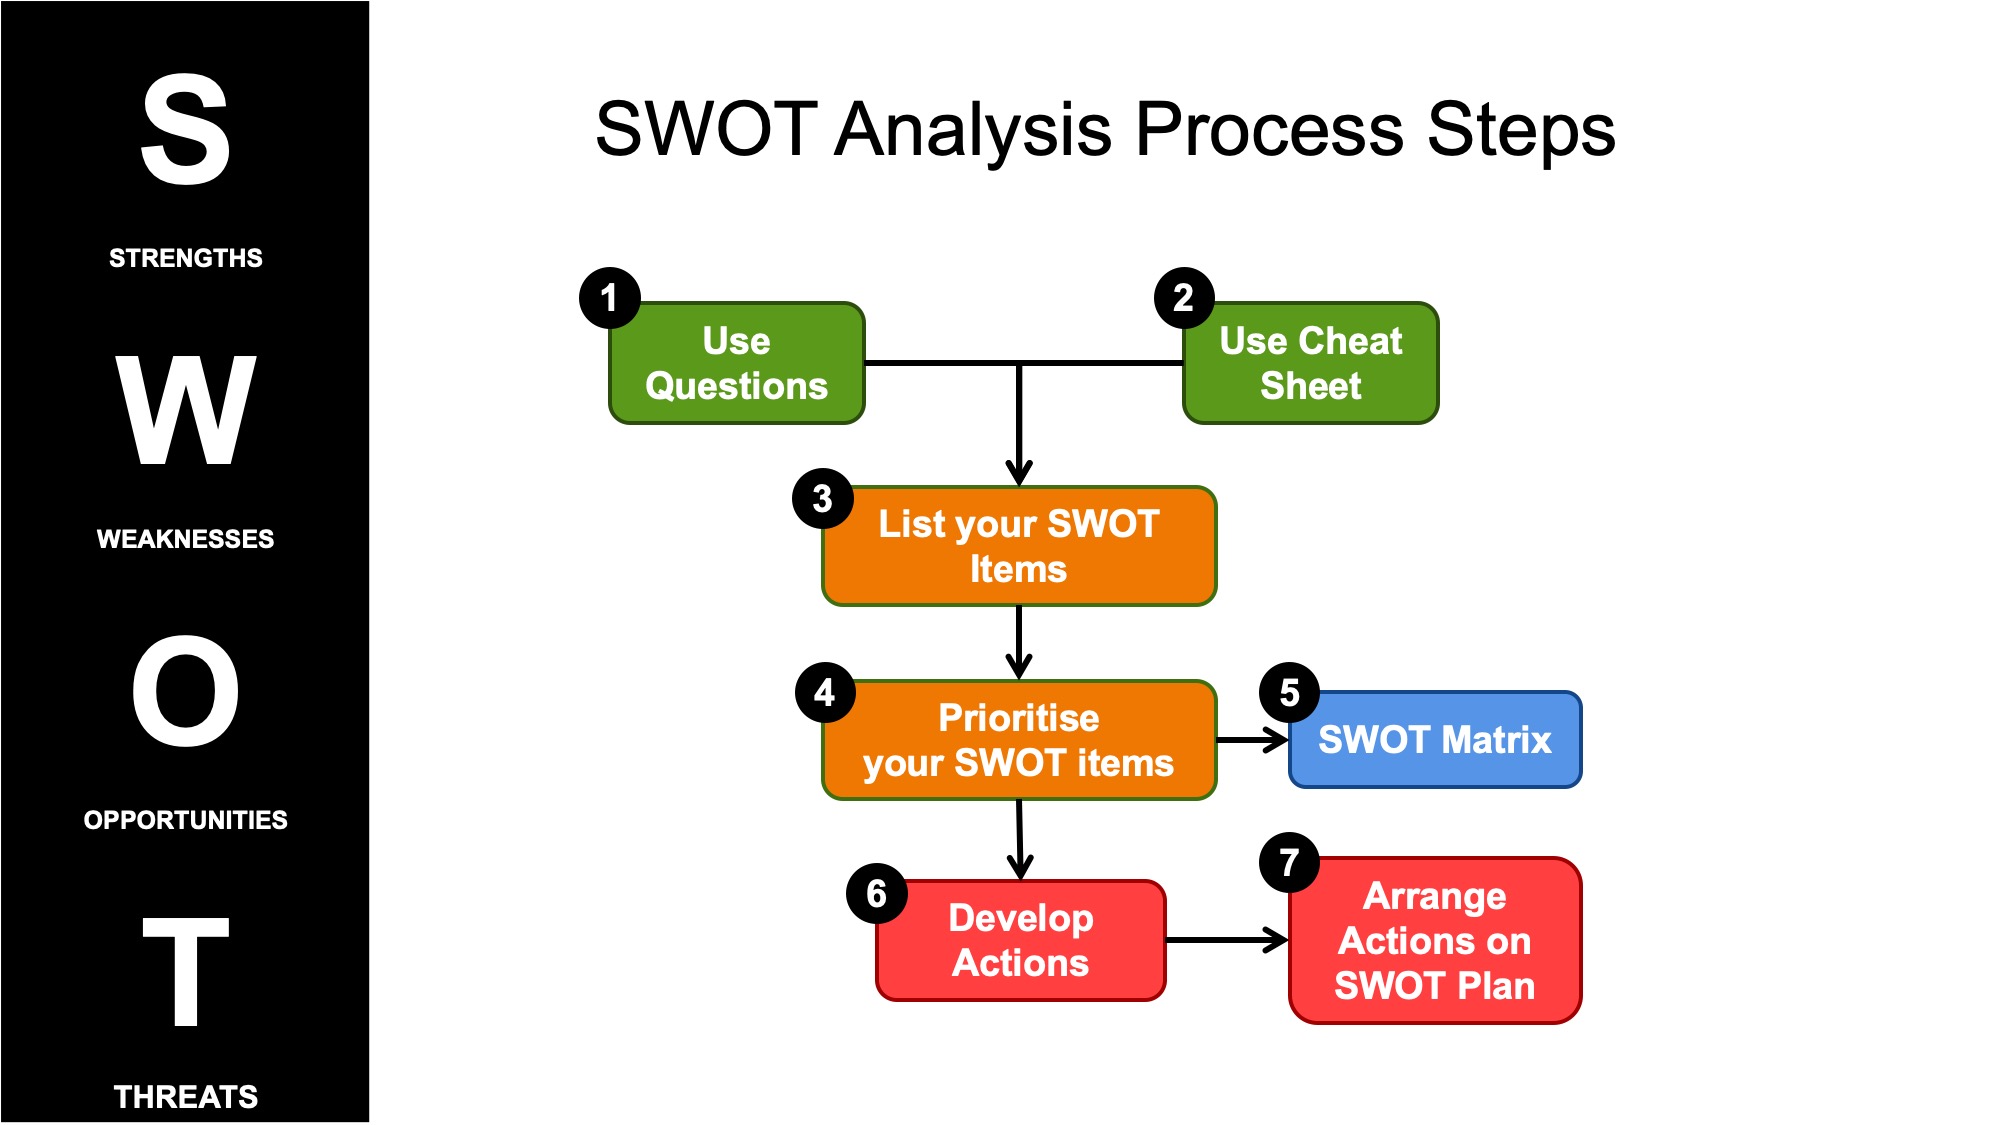 The SWOT Action Plan Process